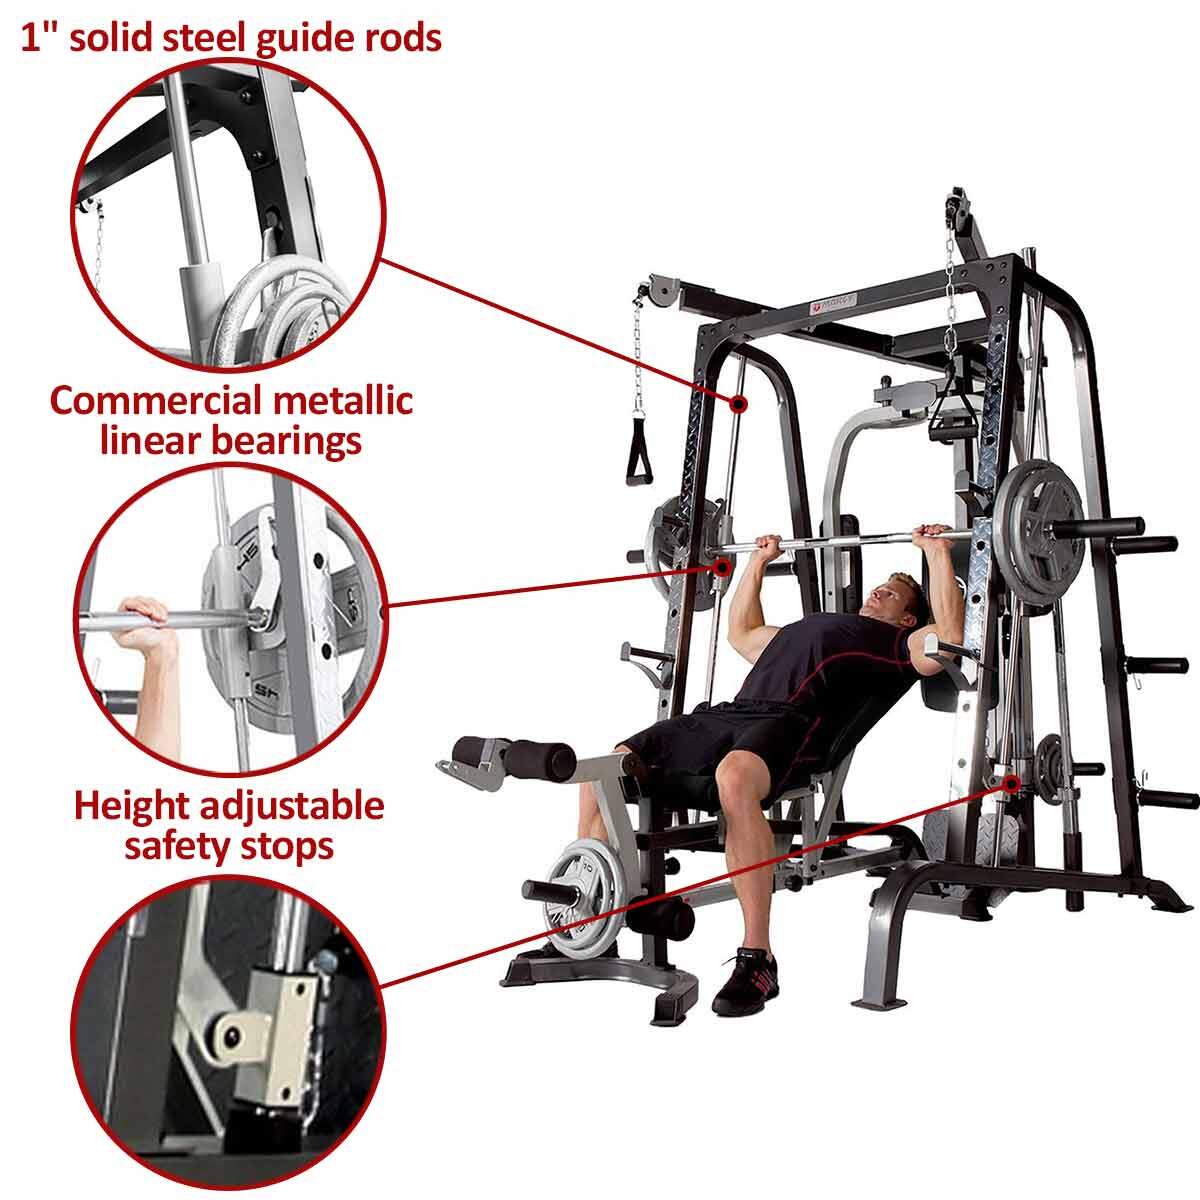 MARCY MD9010G DIAMOND ELITE DELUXE SMITH MACHINE WITH WEIGHT BENCH 2/8